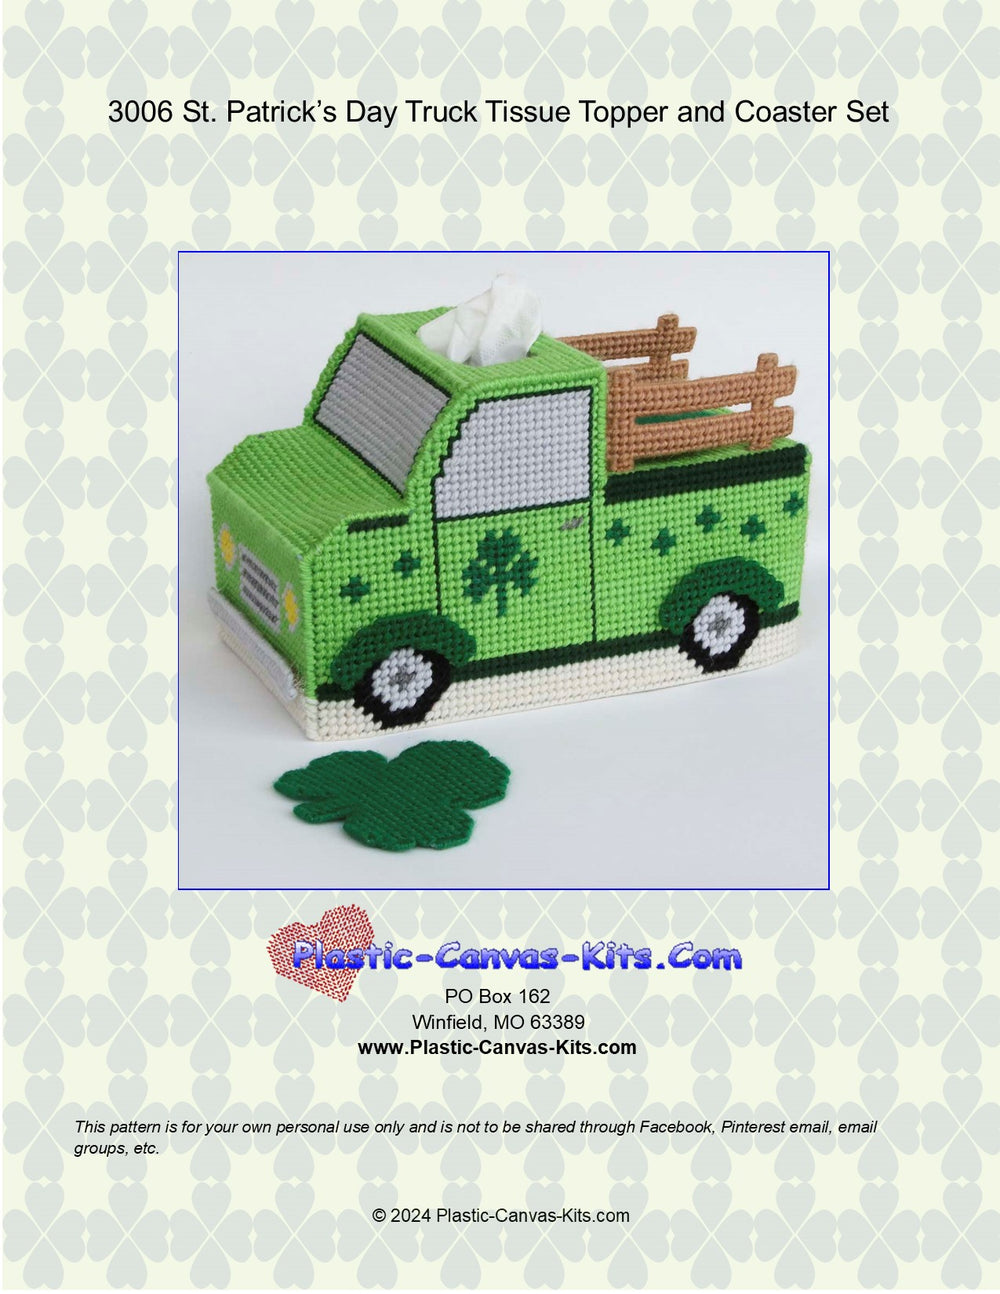 St. Patrick's Day Truck Tissue Topper and Coaster Set